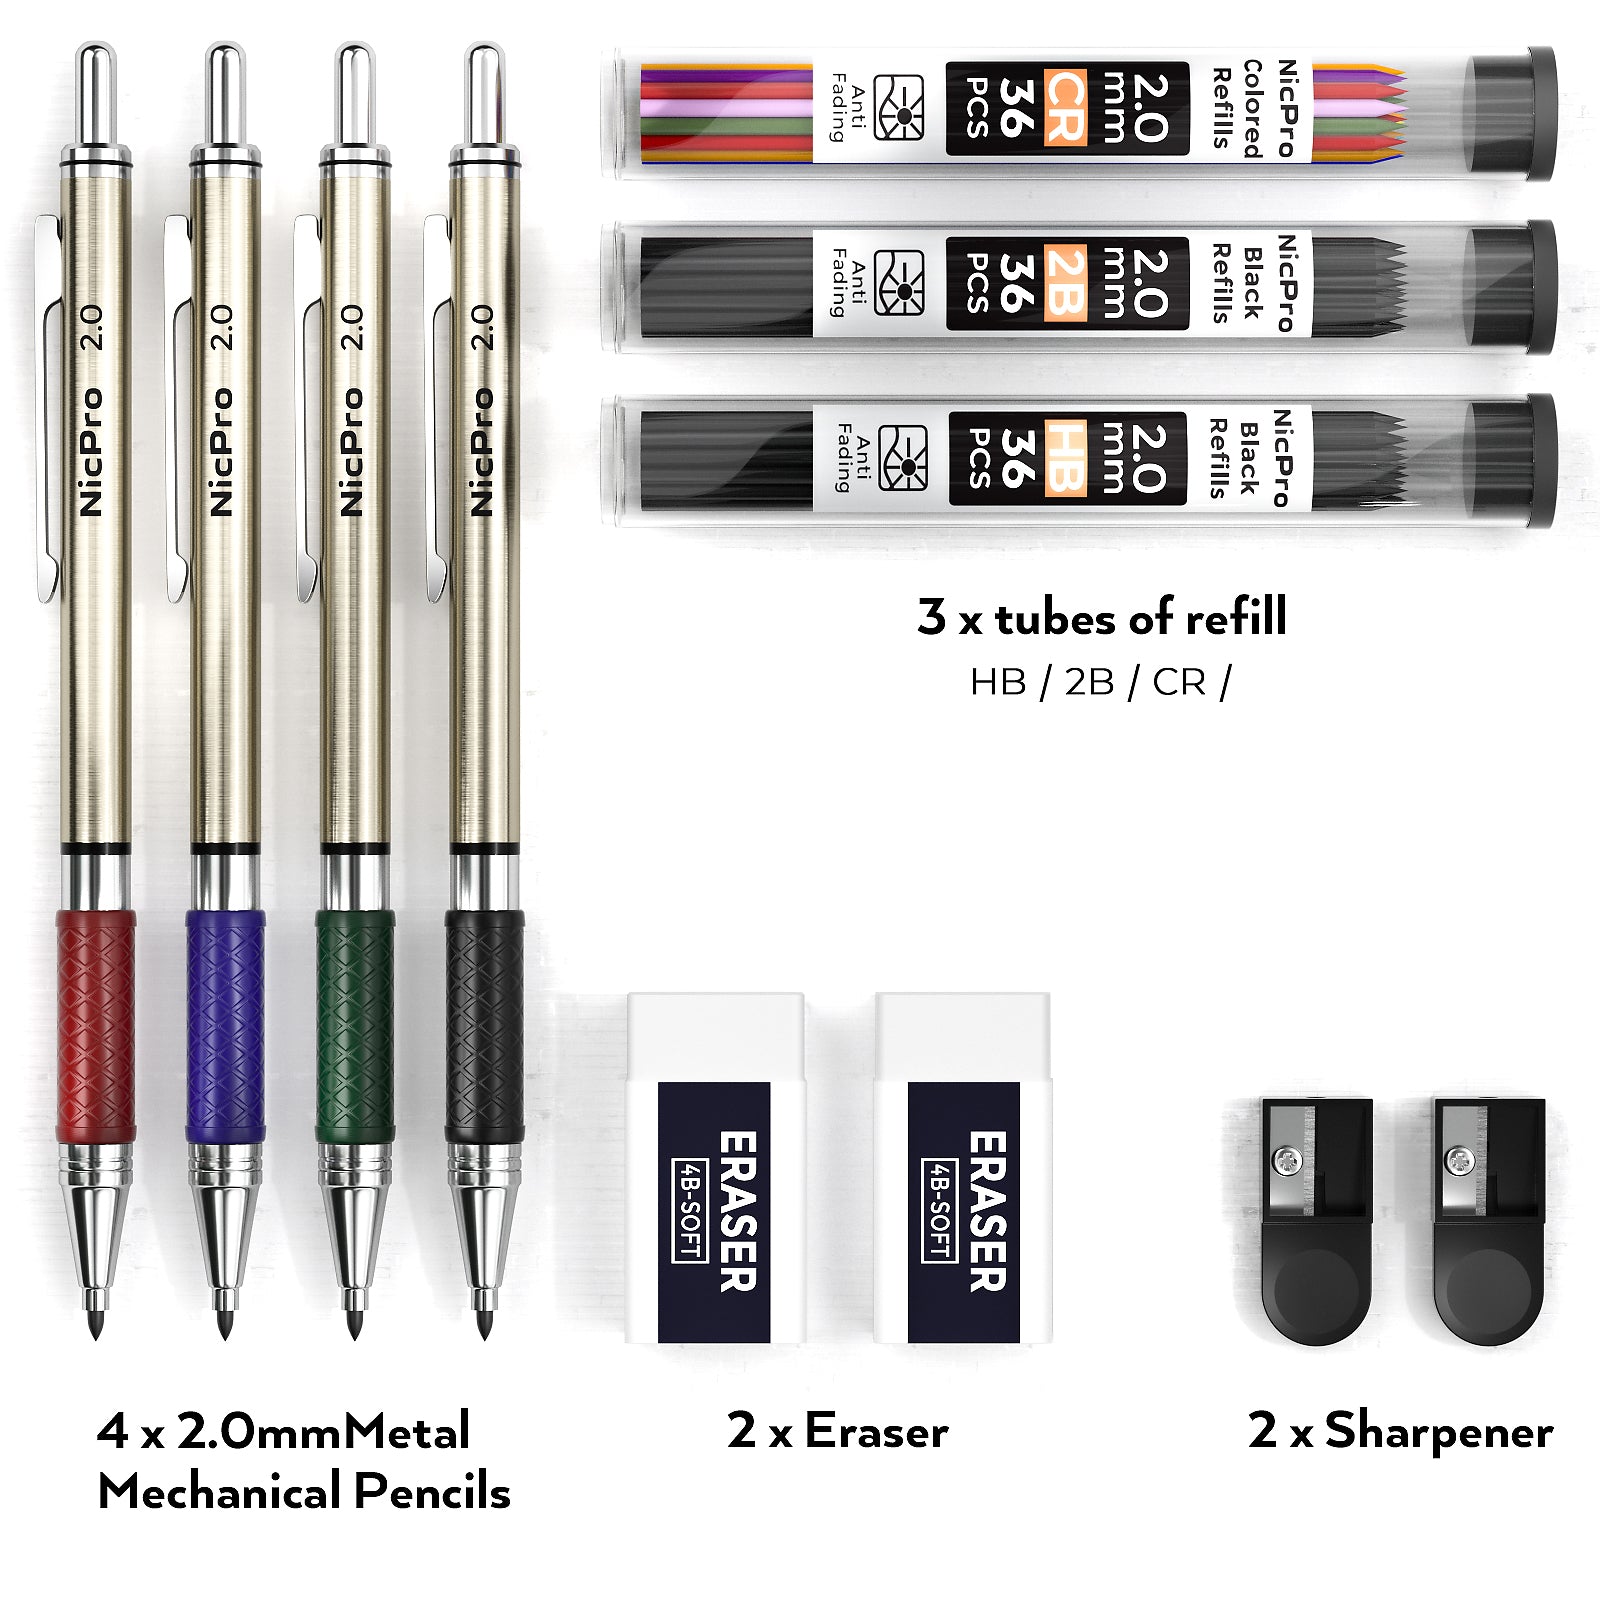 Nicpro 4 PCS 2.0 mm Mechanical Pencils Set with Case, Art Metal Lead Holder 2mm Carpenter Pencil with 72 Graphite Lead Refills(HB 2B) & 36 Colors, 2 Erasers, 2 Sharpeners for Writing Sketching Drawing